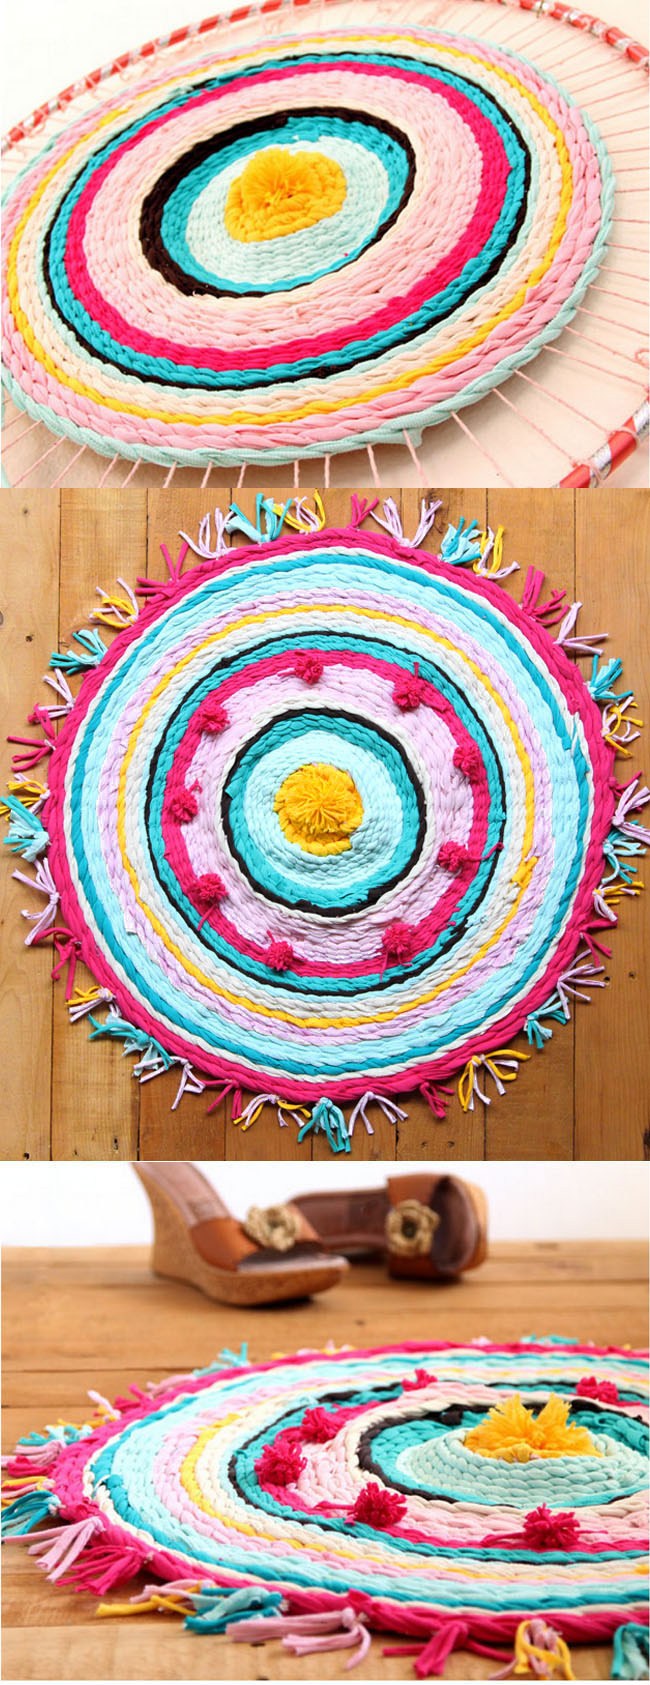 DIY Rag Rug From Old T-Shirts